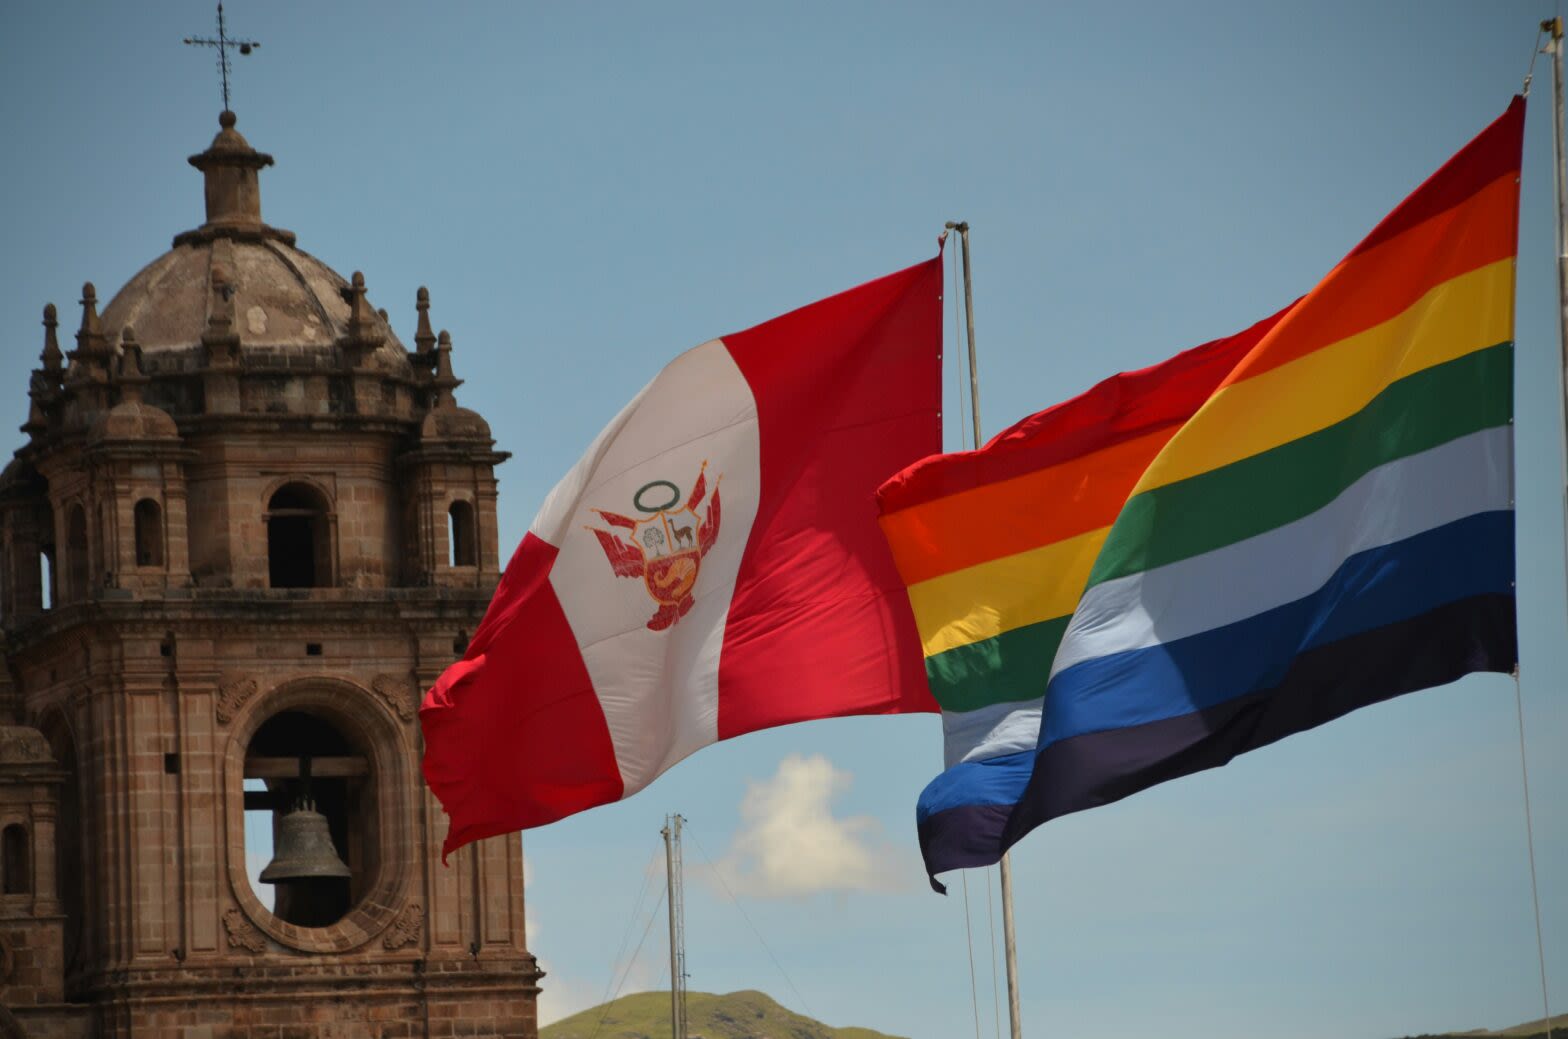 Peru Classifies LGBTQIA+ Community As ‘Mentally Ill’ In New Decree, Sparking Outrage